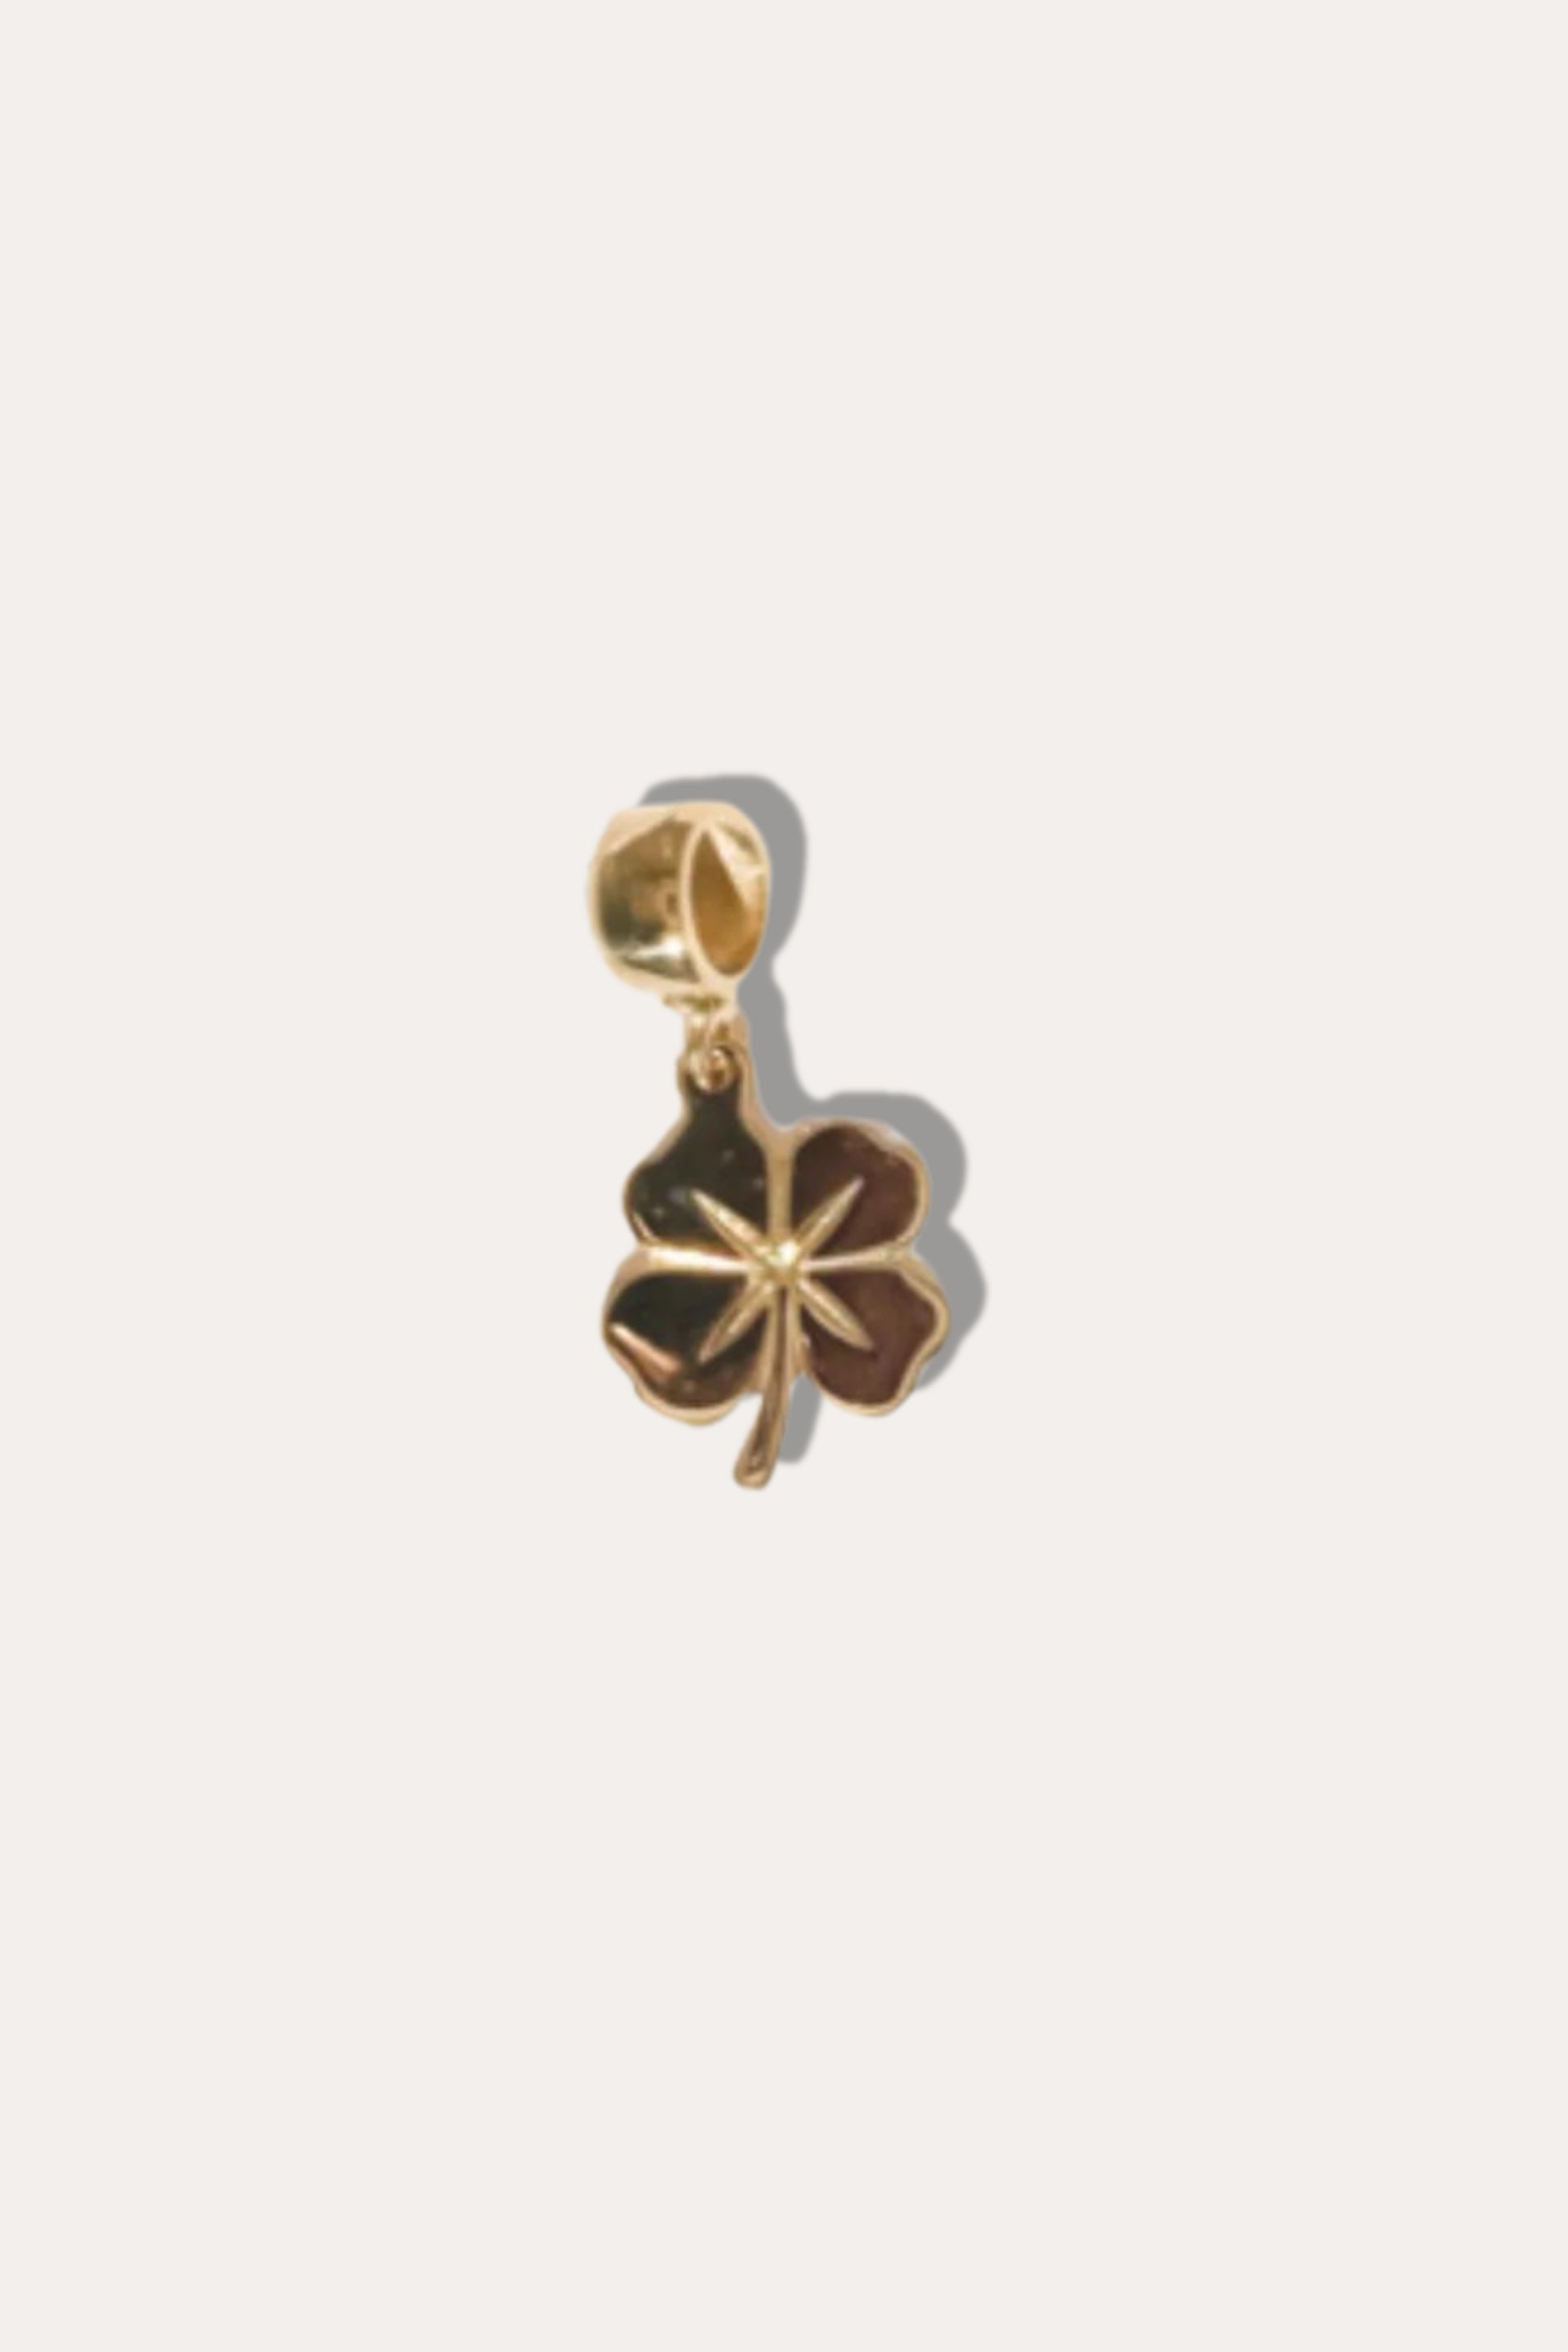 Four Leaf Clover Lucky Charm - 14k Yellow Gold